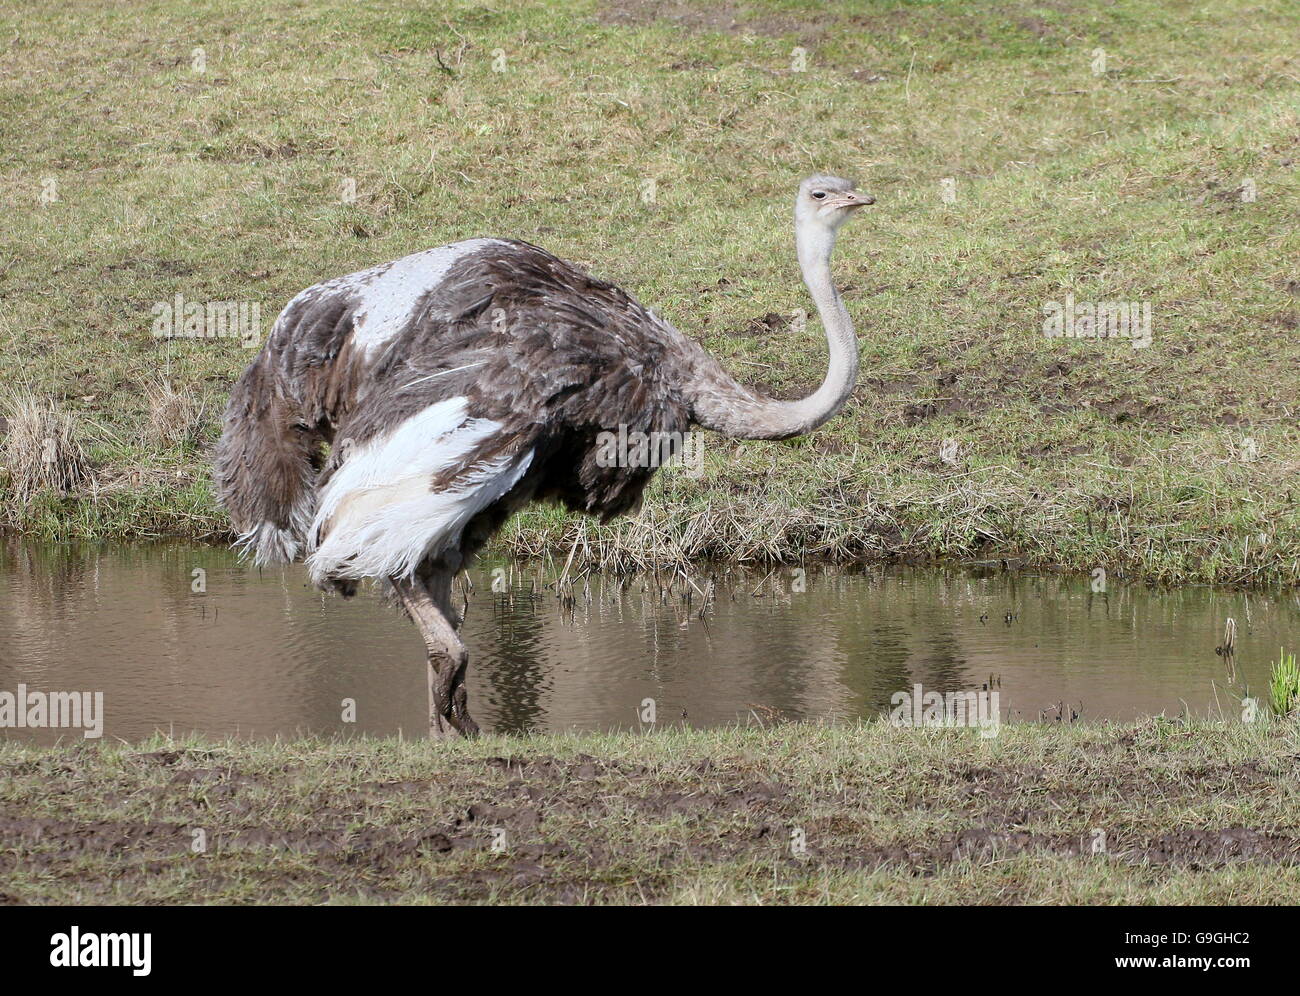 Female African Common Ostrich (Struthio camelus) near the water's edge Stock Photo